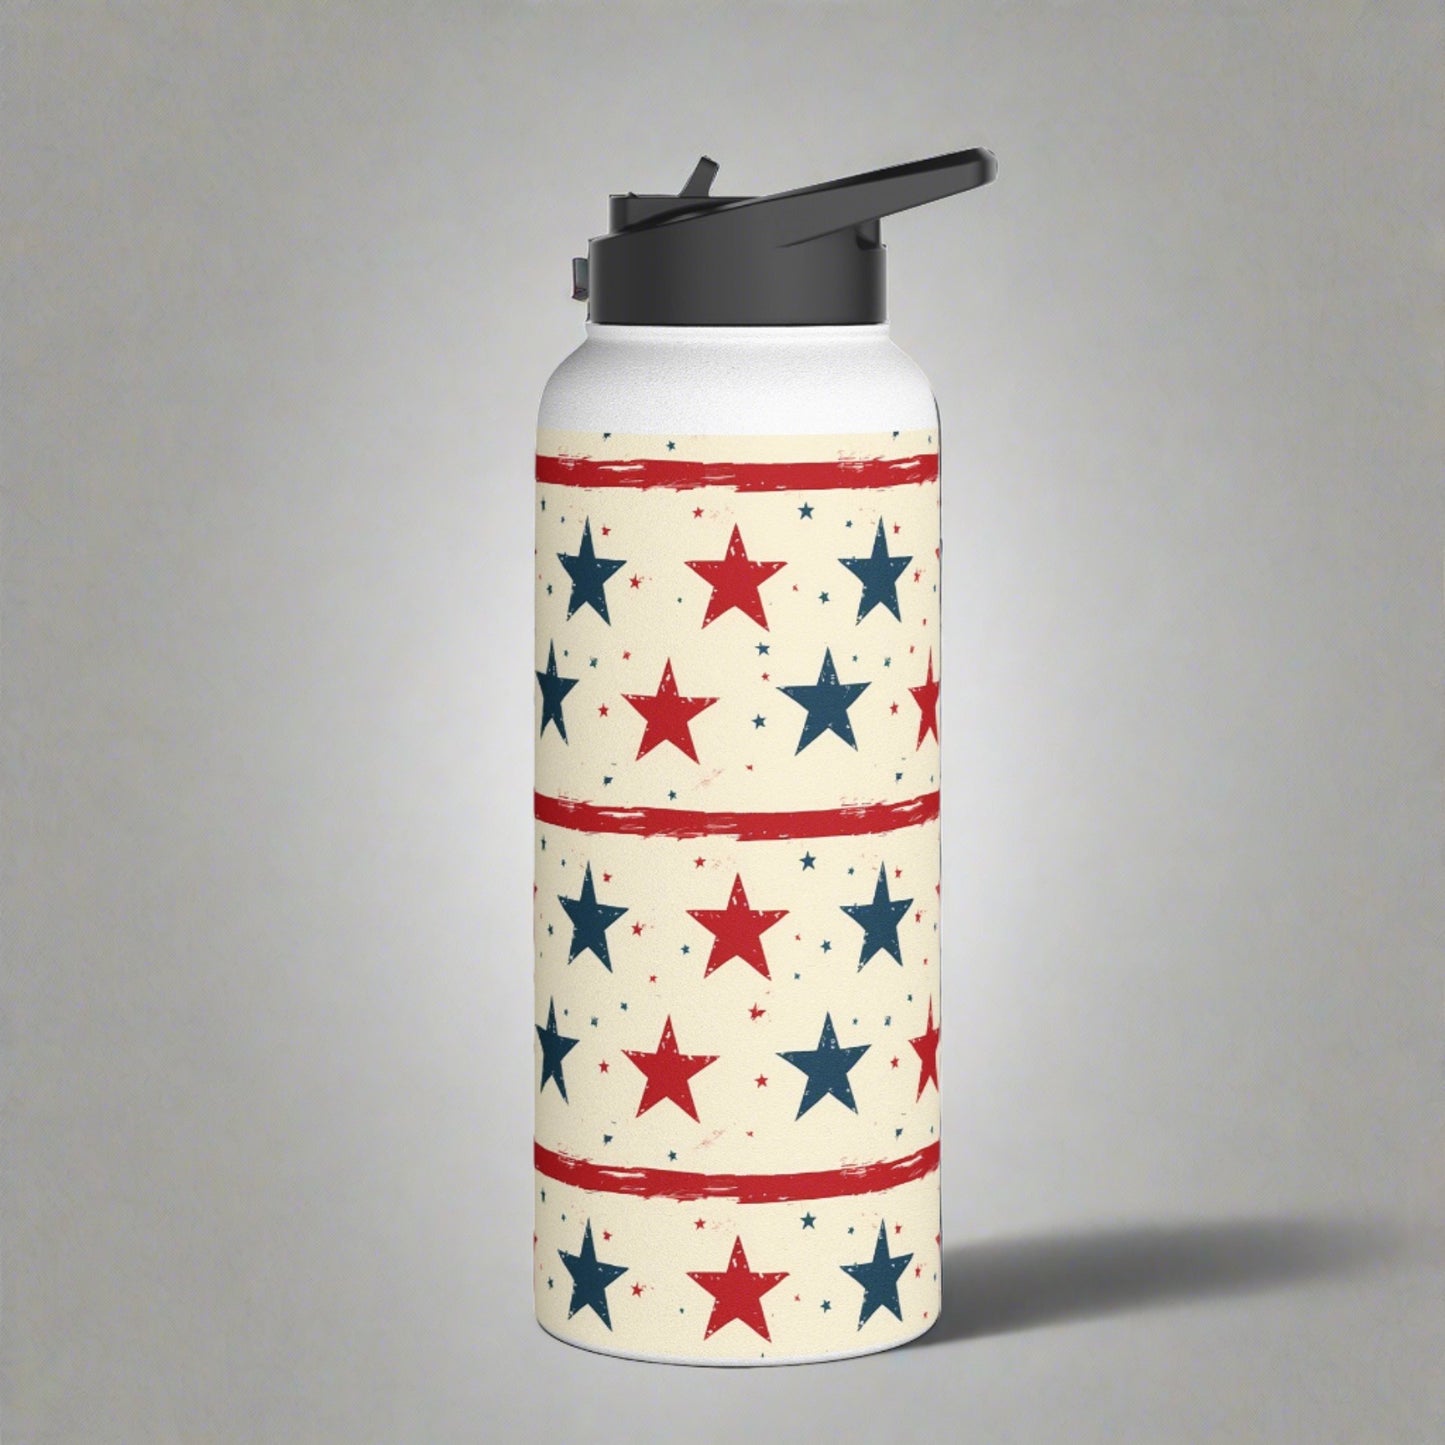 Stainless Steel Water Bottle Thermos, 32oz, Stars & Stripes - Double Wall Insulation Keeps Drinks Hot or Cold